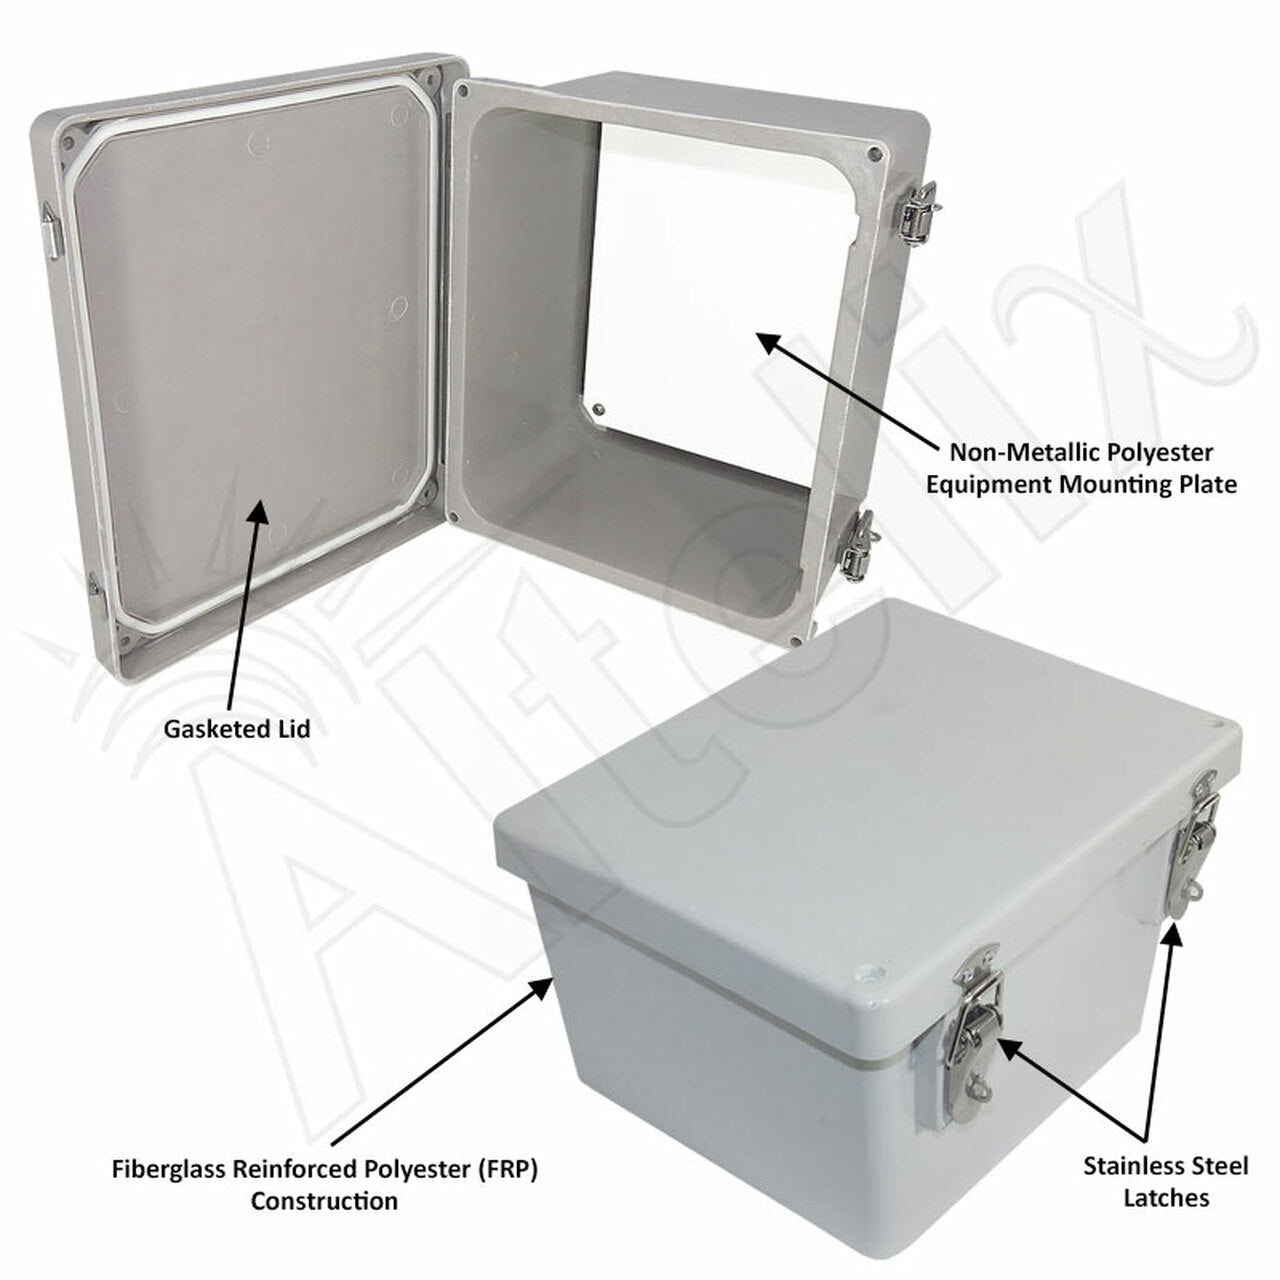 Altelix NEMA 4X Fiberglass Indoor / Outdoor RF Transparent WiFi Access Point Enclosure with Polyester Equipment Mounting Plate